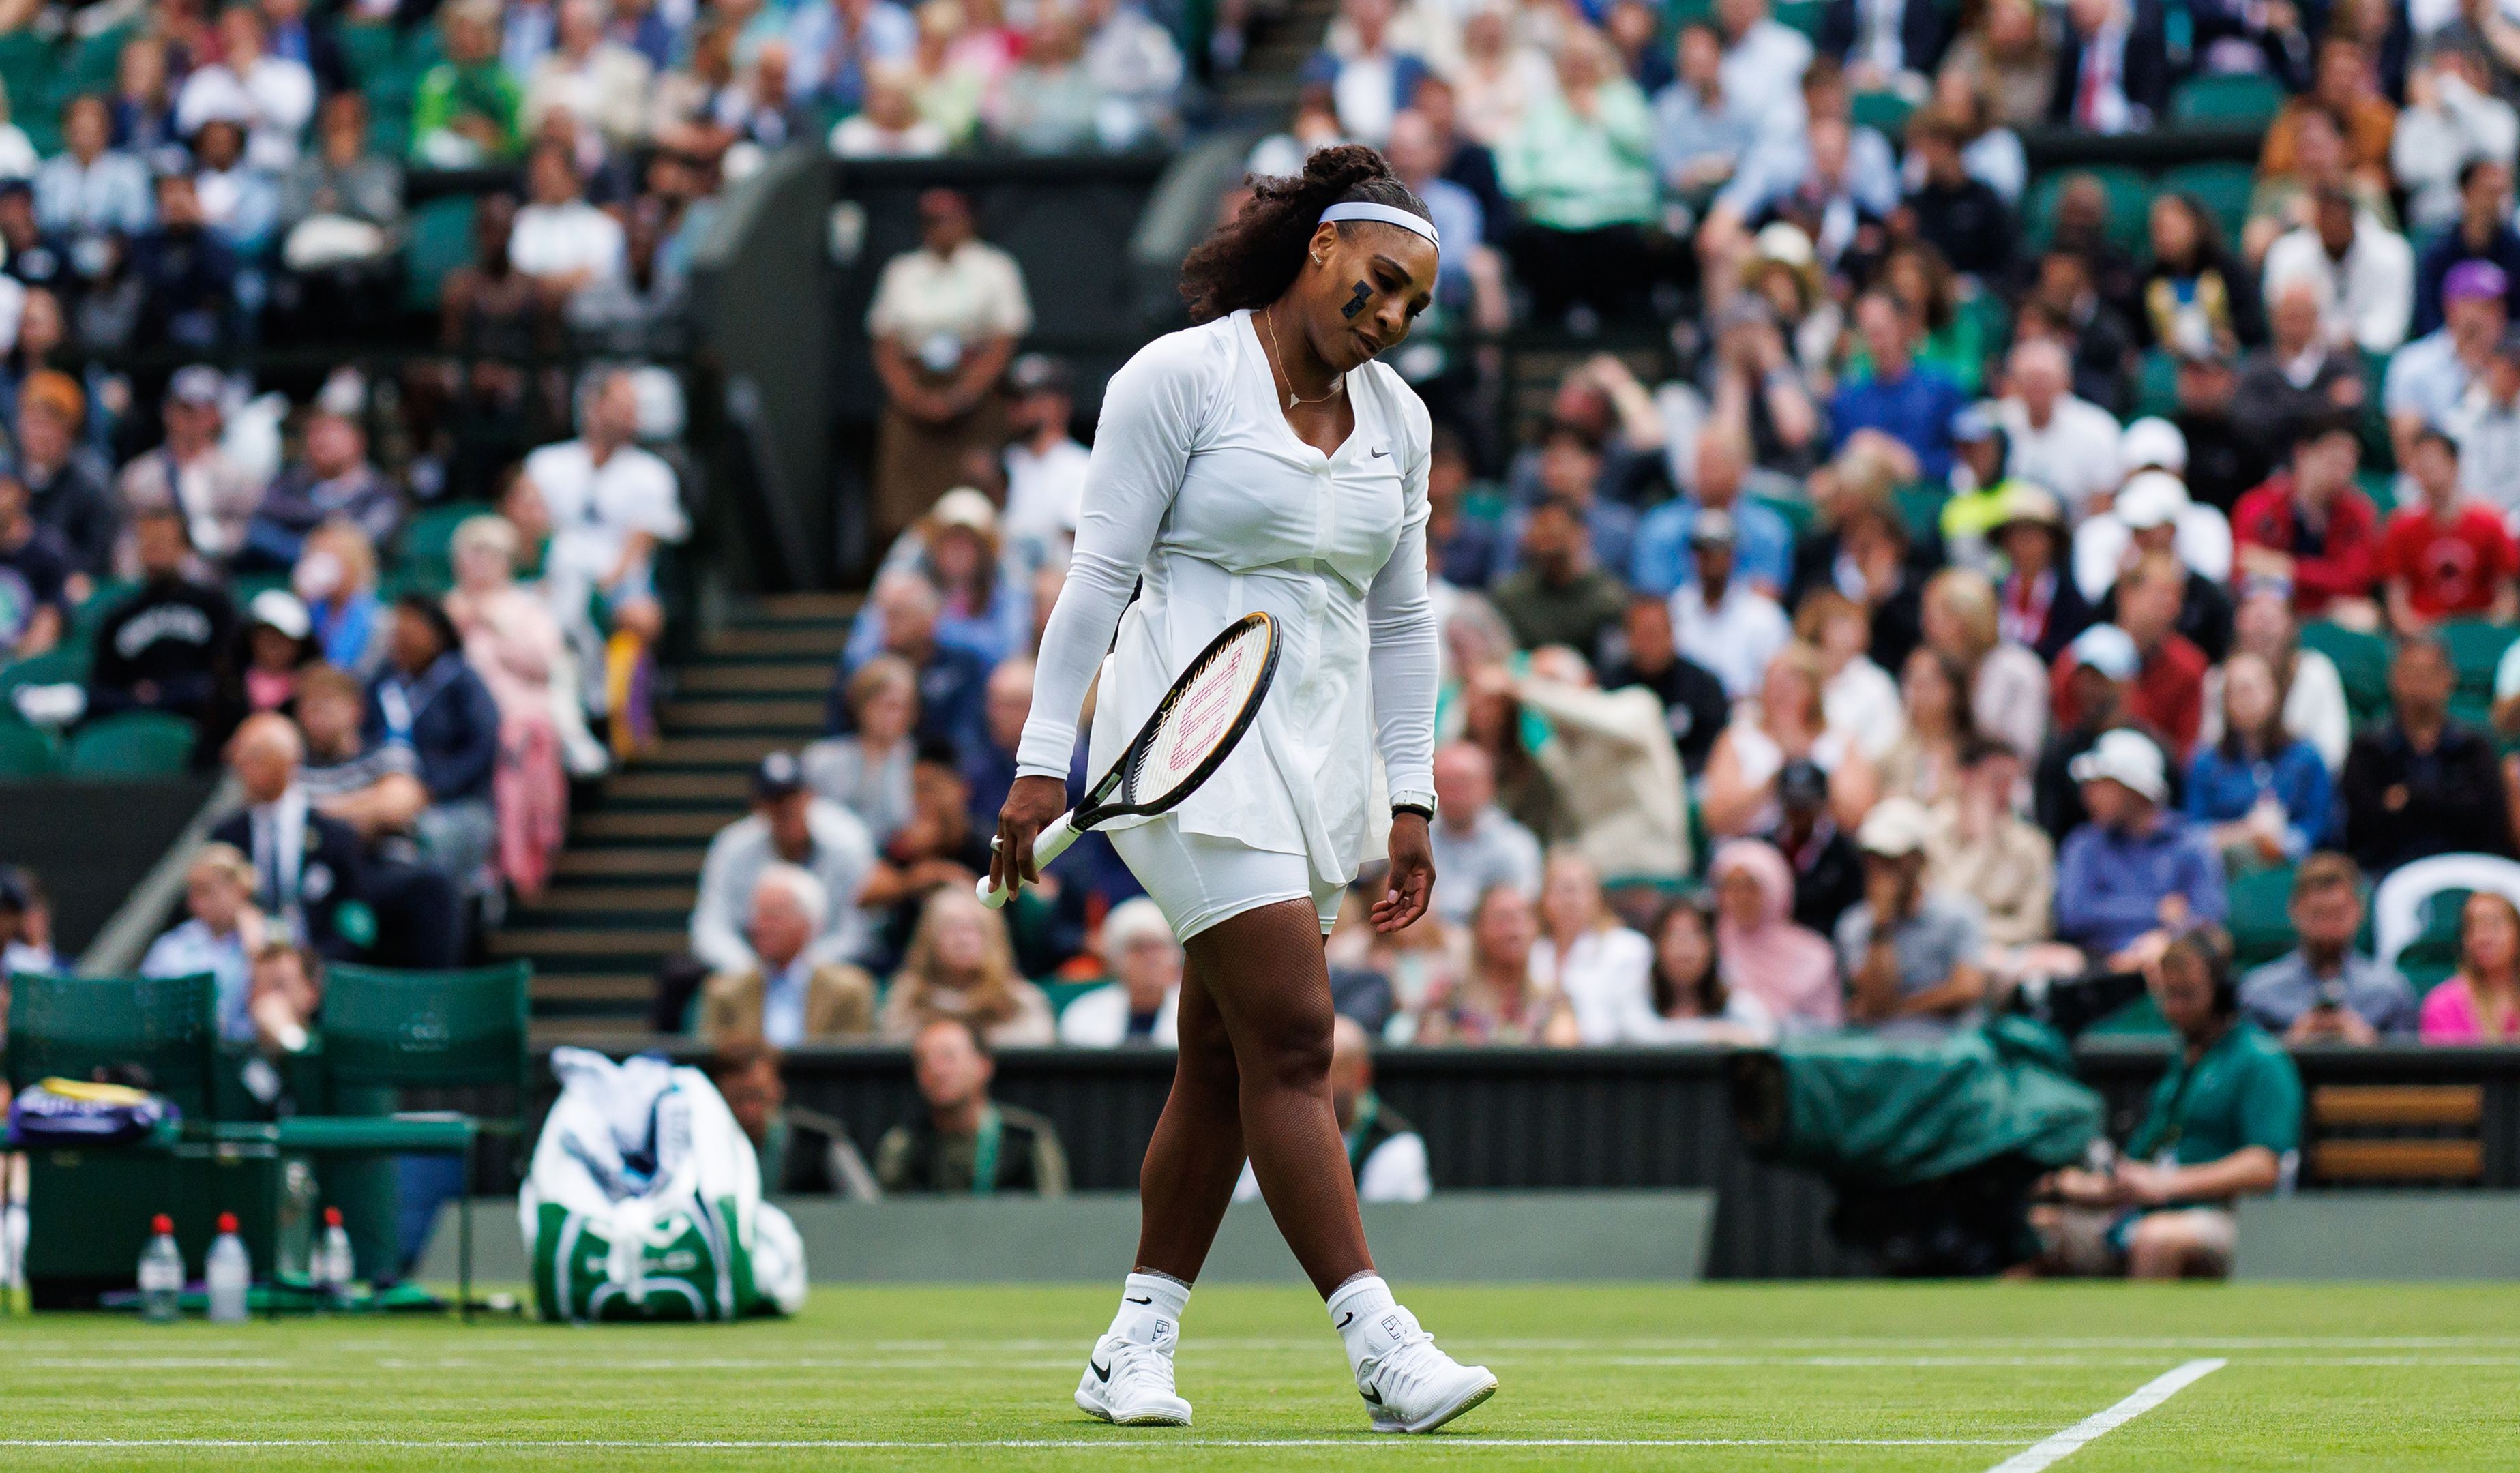 EXCLUSIVE: Retirement tipped for Serena Williams after harrowing Wimbledon loss